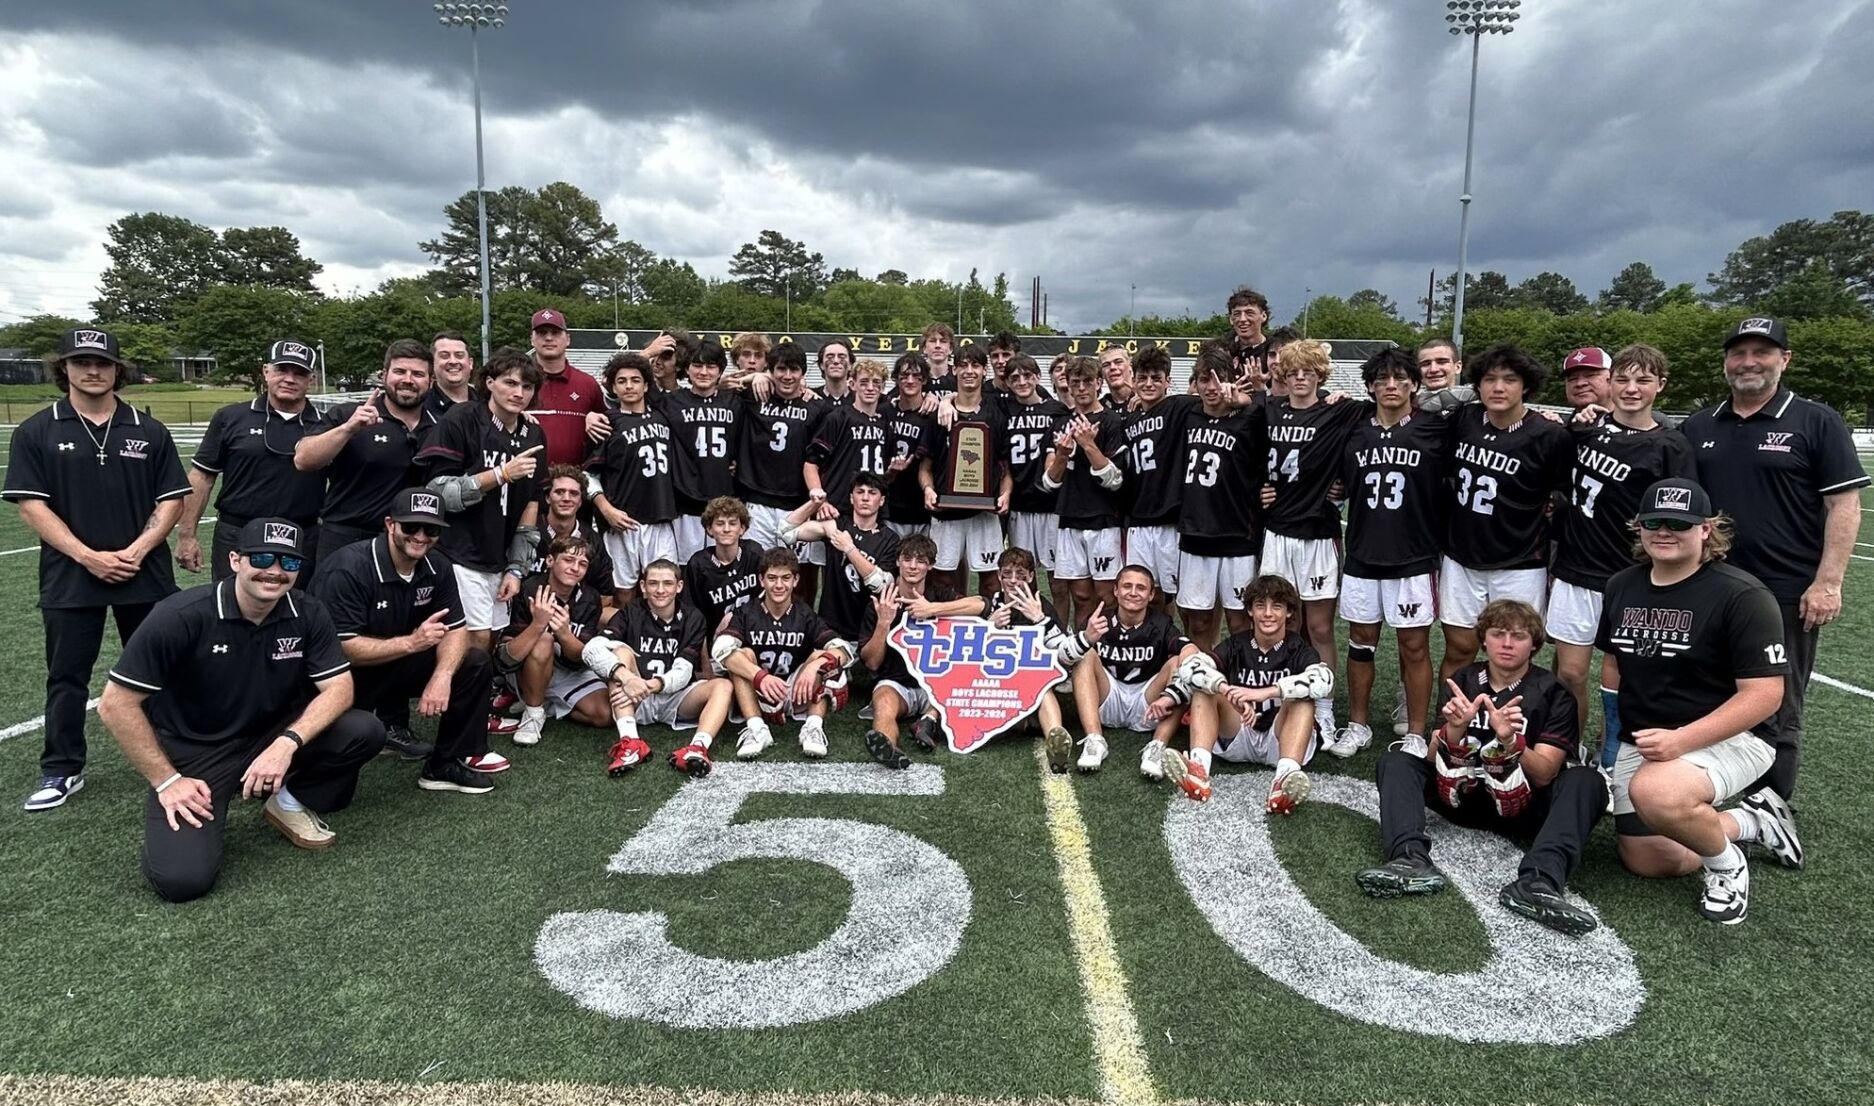 Wando and Bishop England Claim Lacrosse State Titles in High School Championships